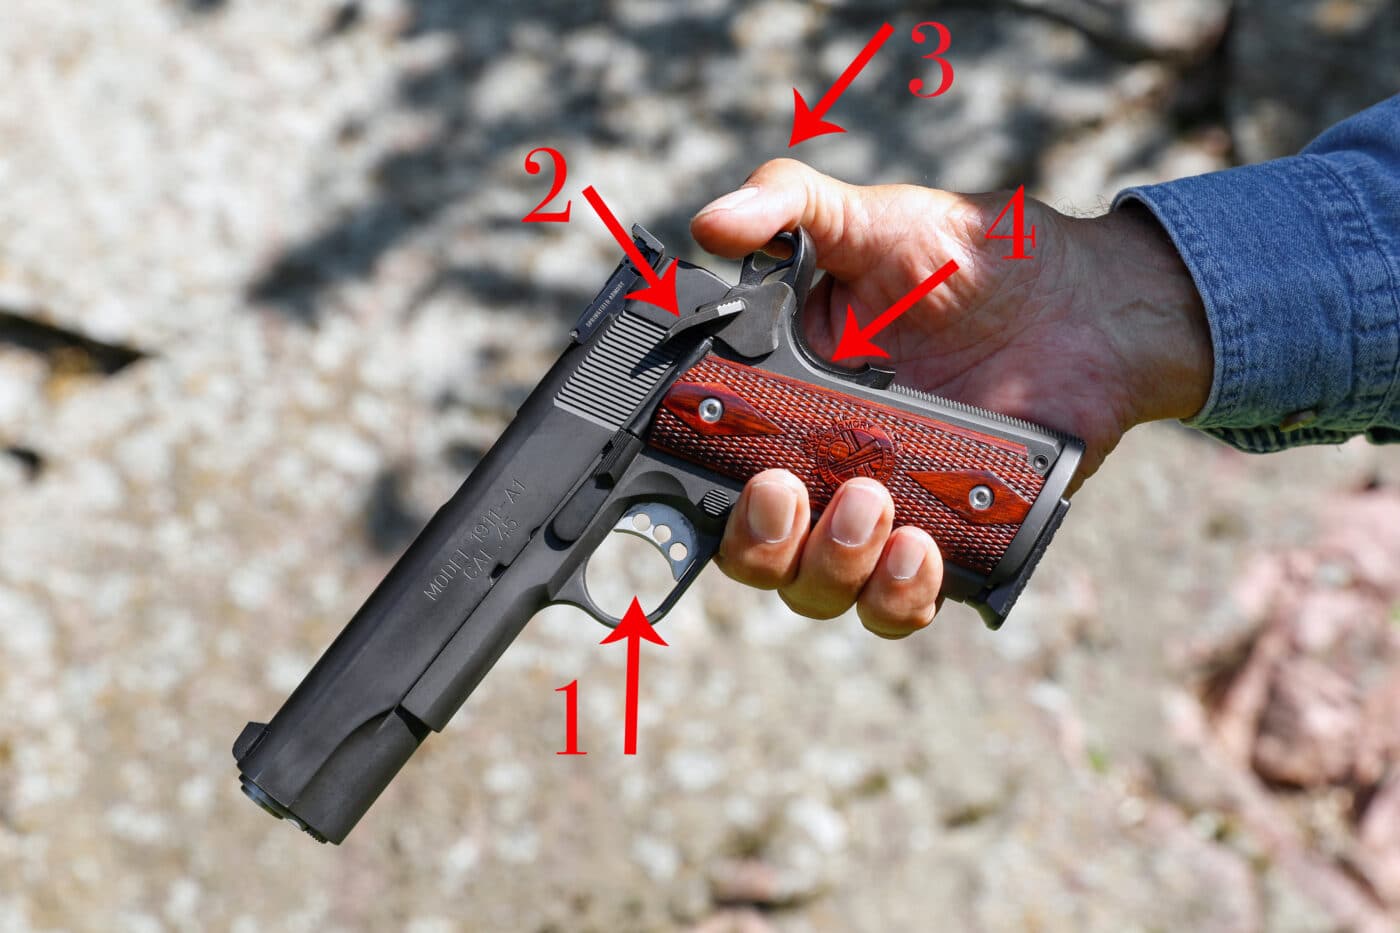 Ayoob demonstrating how to safely holster a 1911